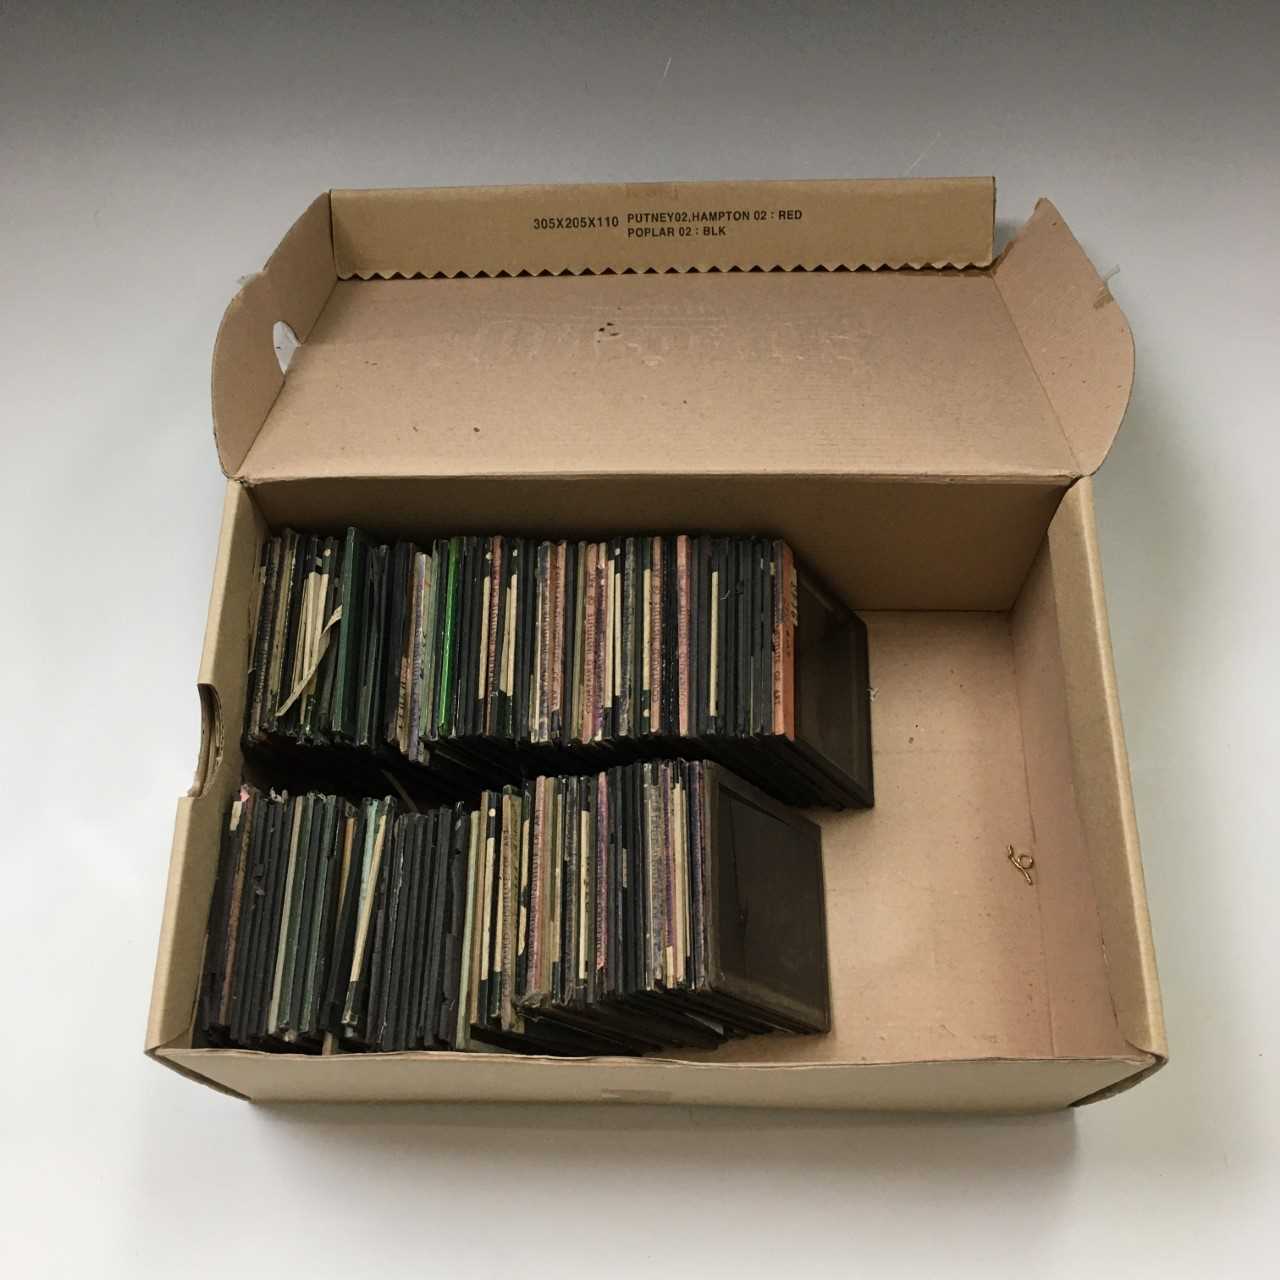 A 'Lonsdale' box containing 130 glass magic lantern slides. Subjects are mostly paintings, - Image 3 of 3